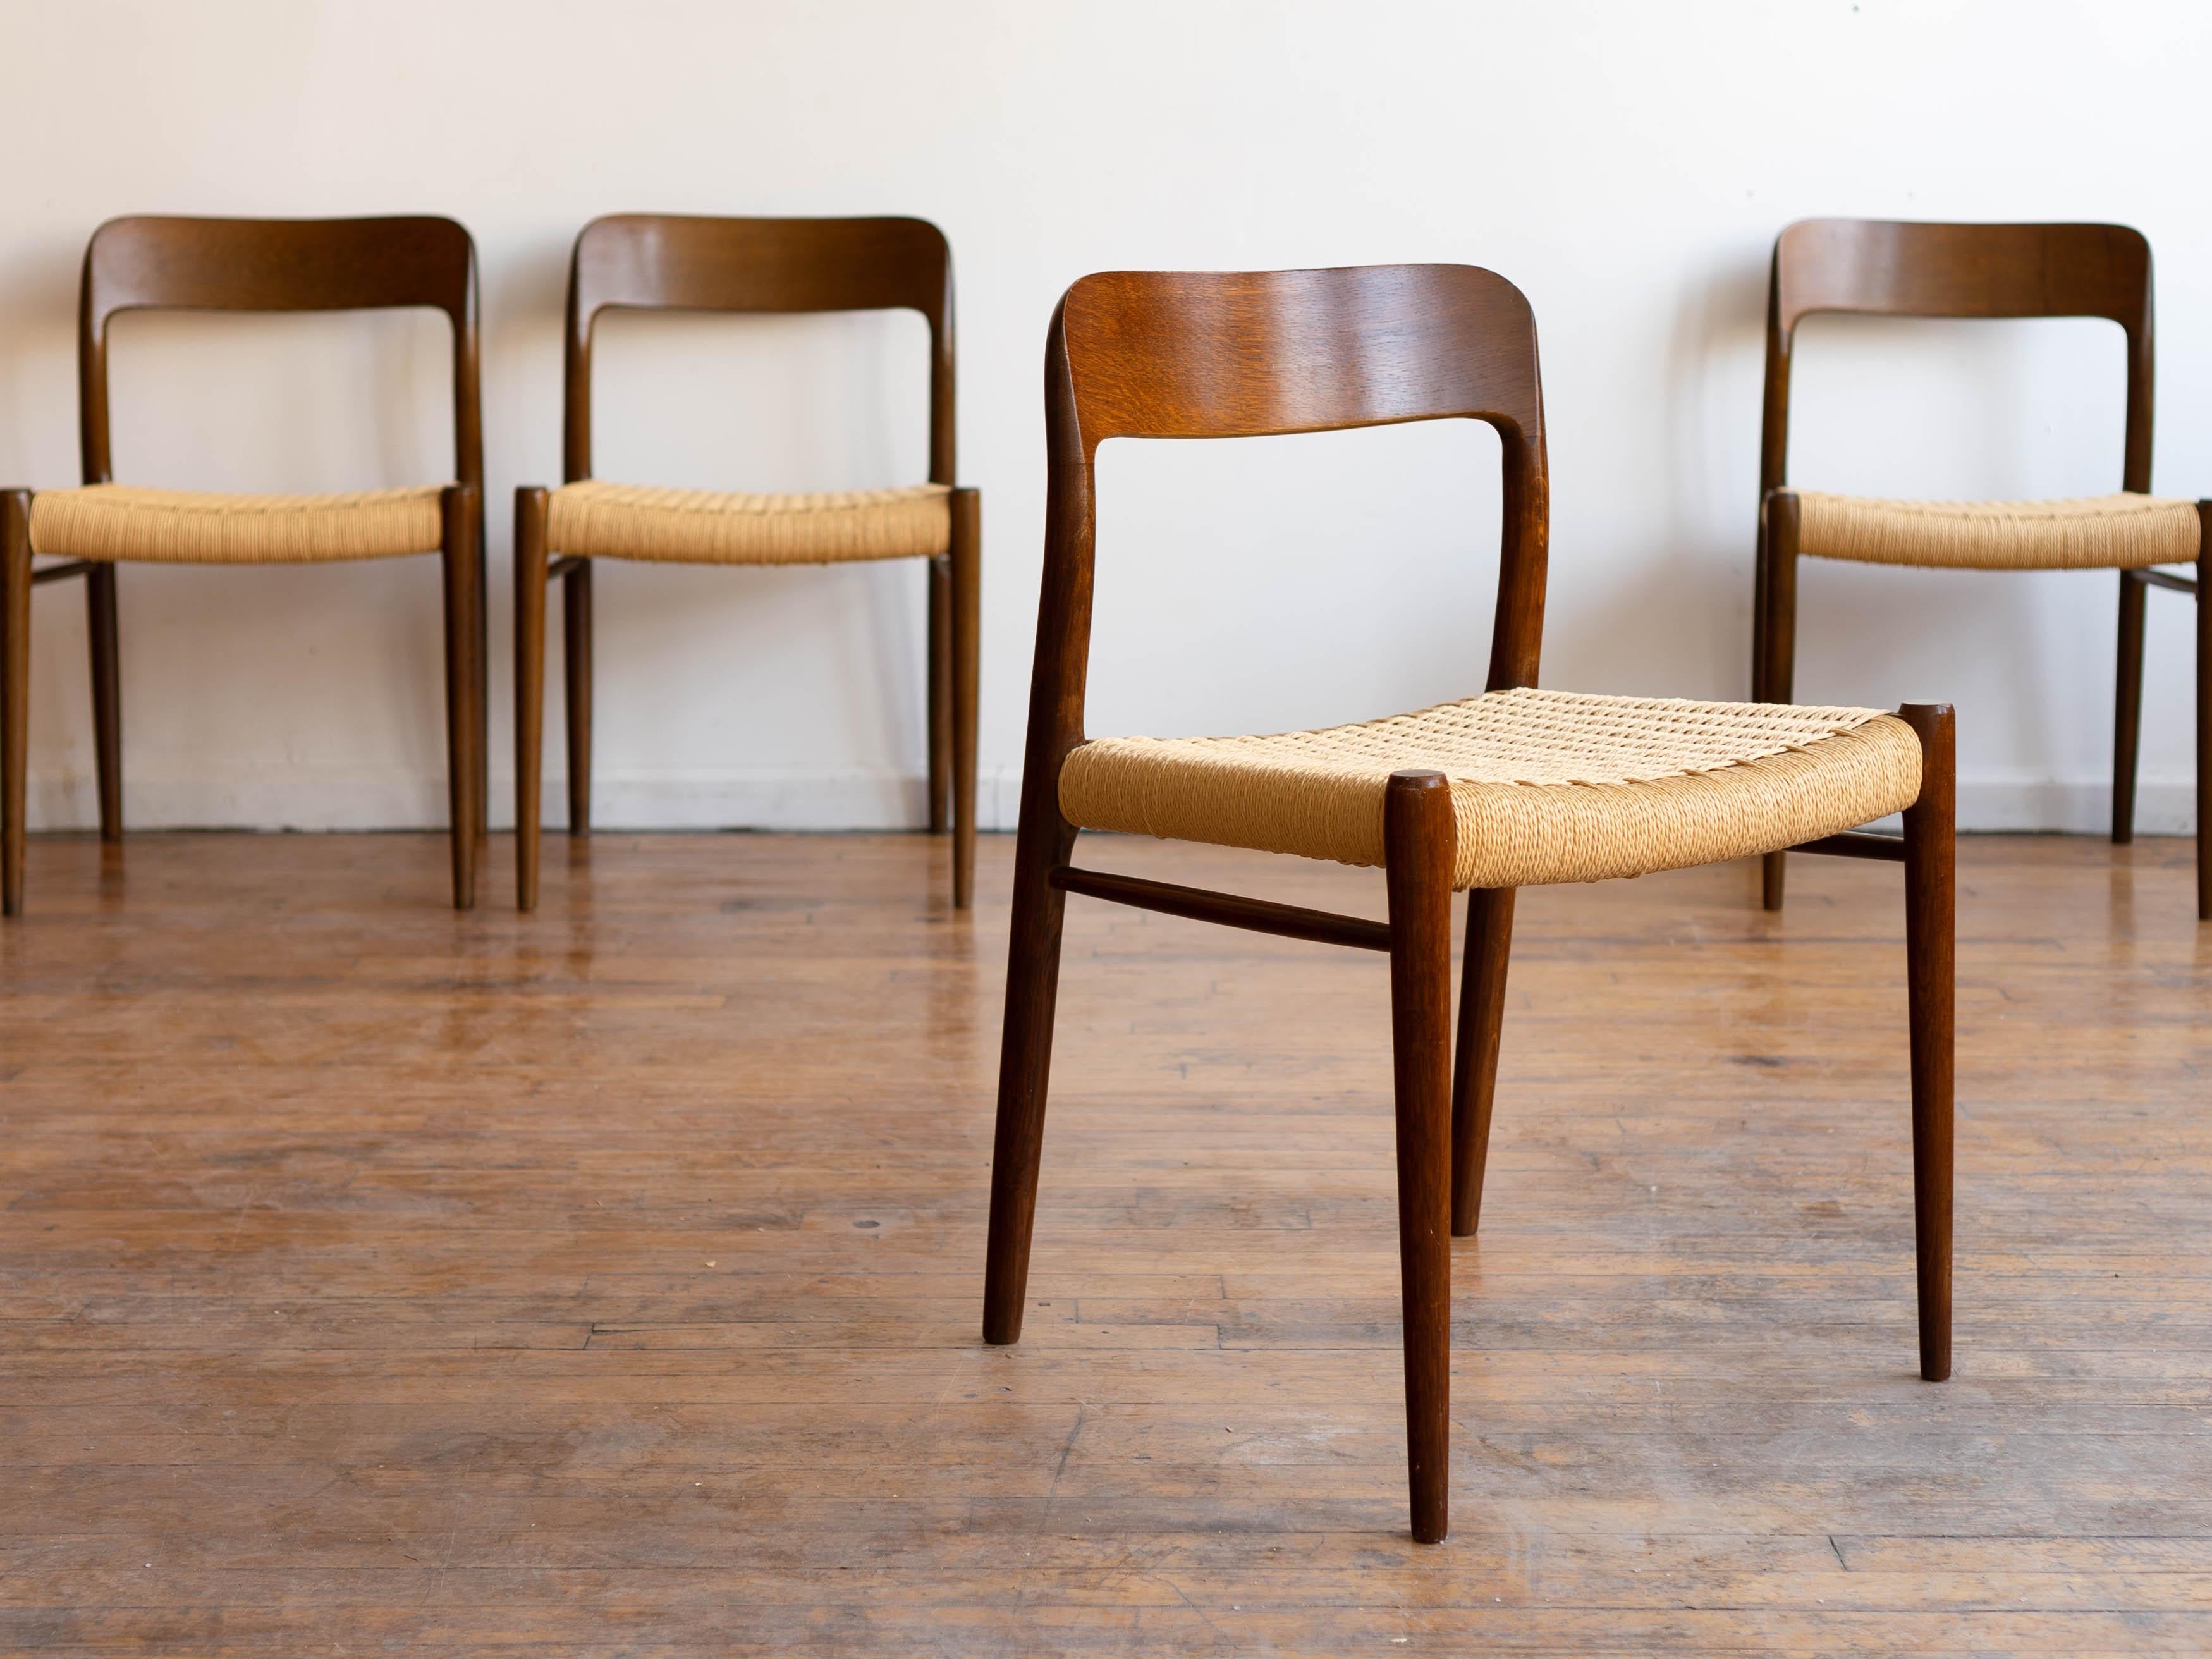 1960s Mid-Century Modern Danish Moller 75 Chairs in Wenge Wood - Set of 4 In Good Condition In Chicago, IL